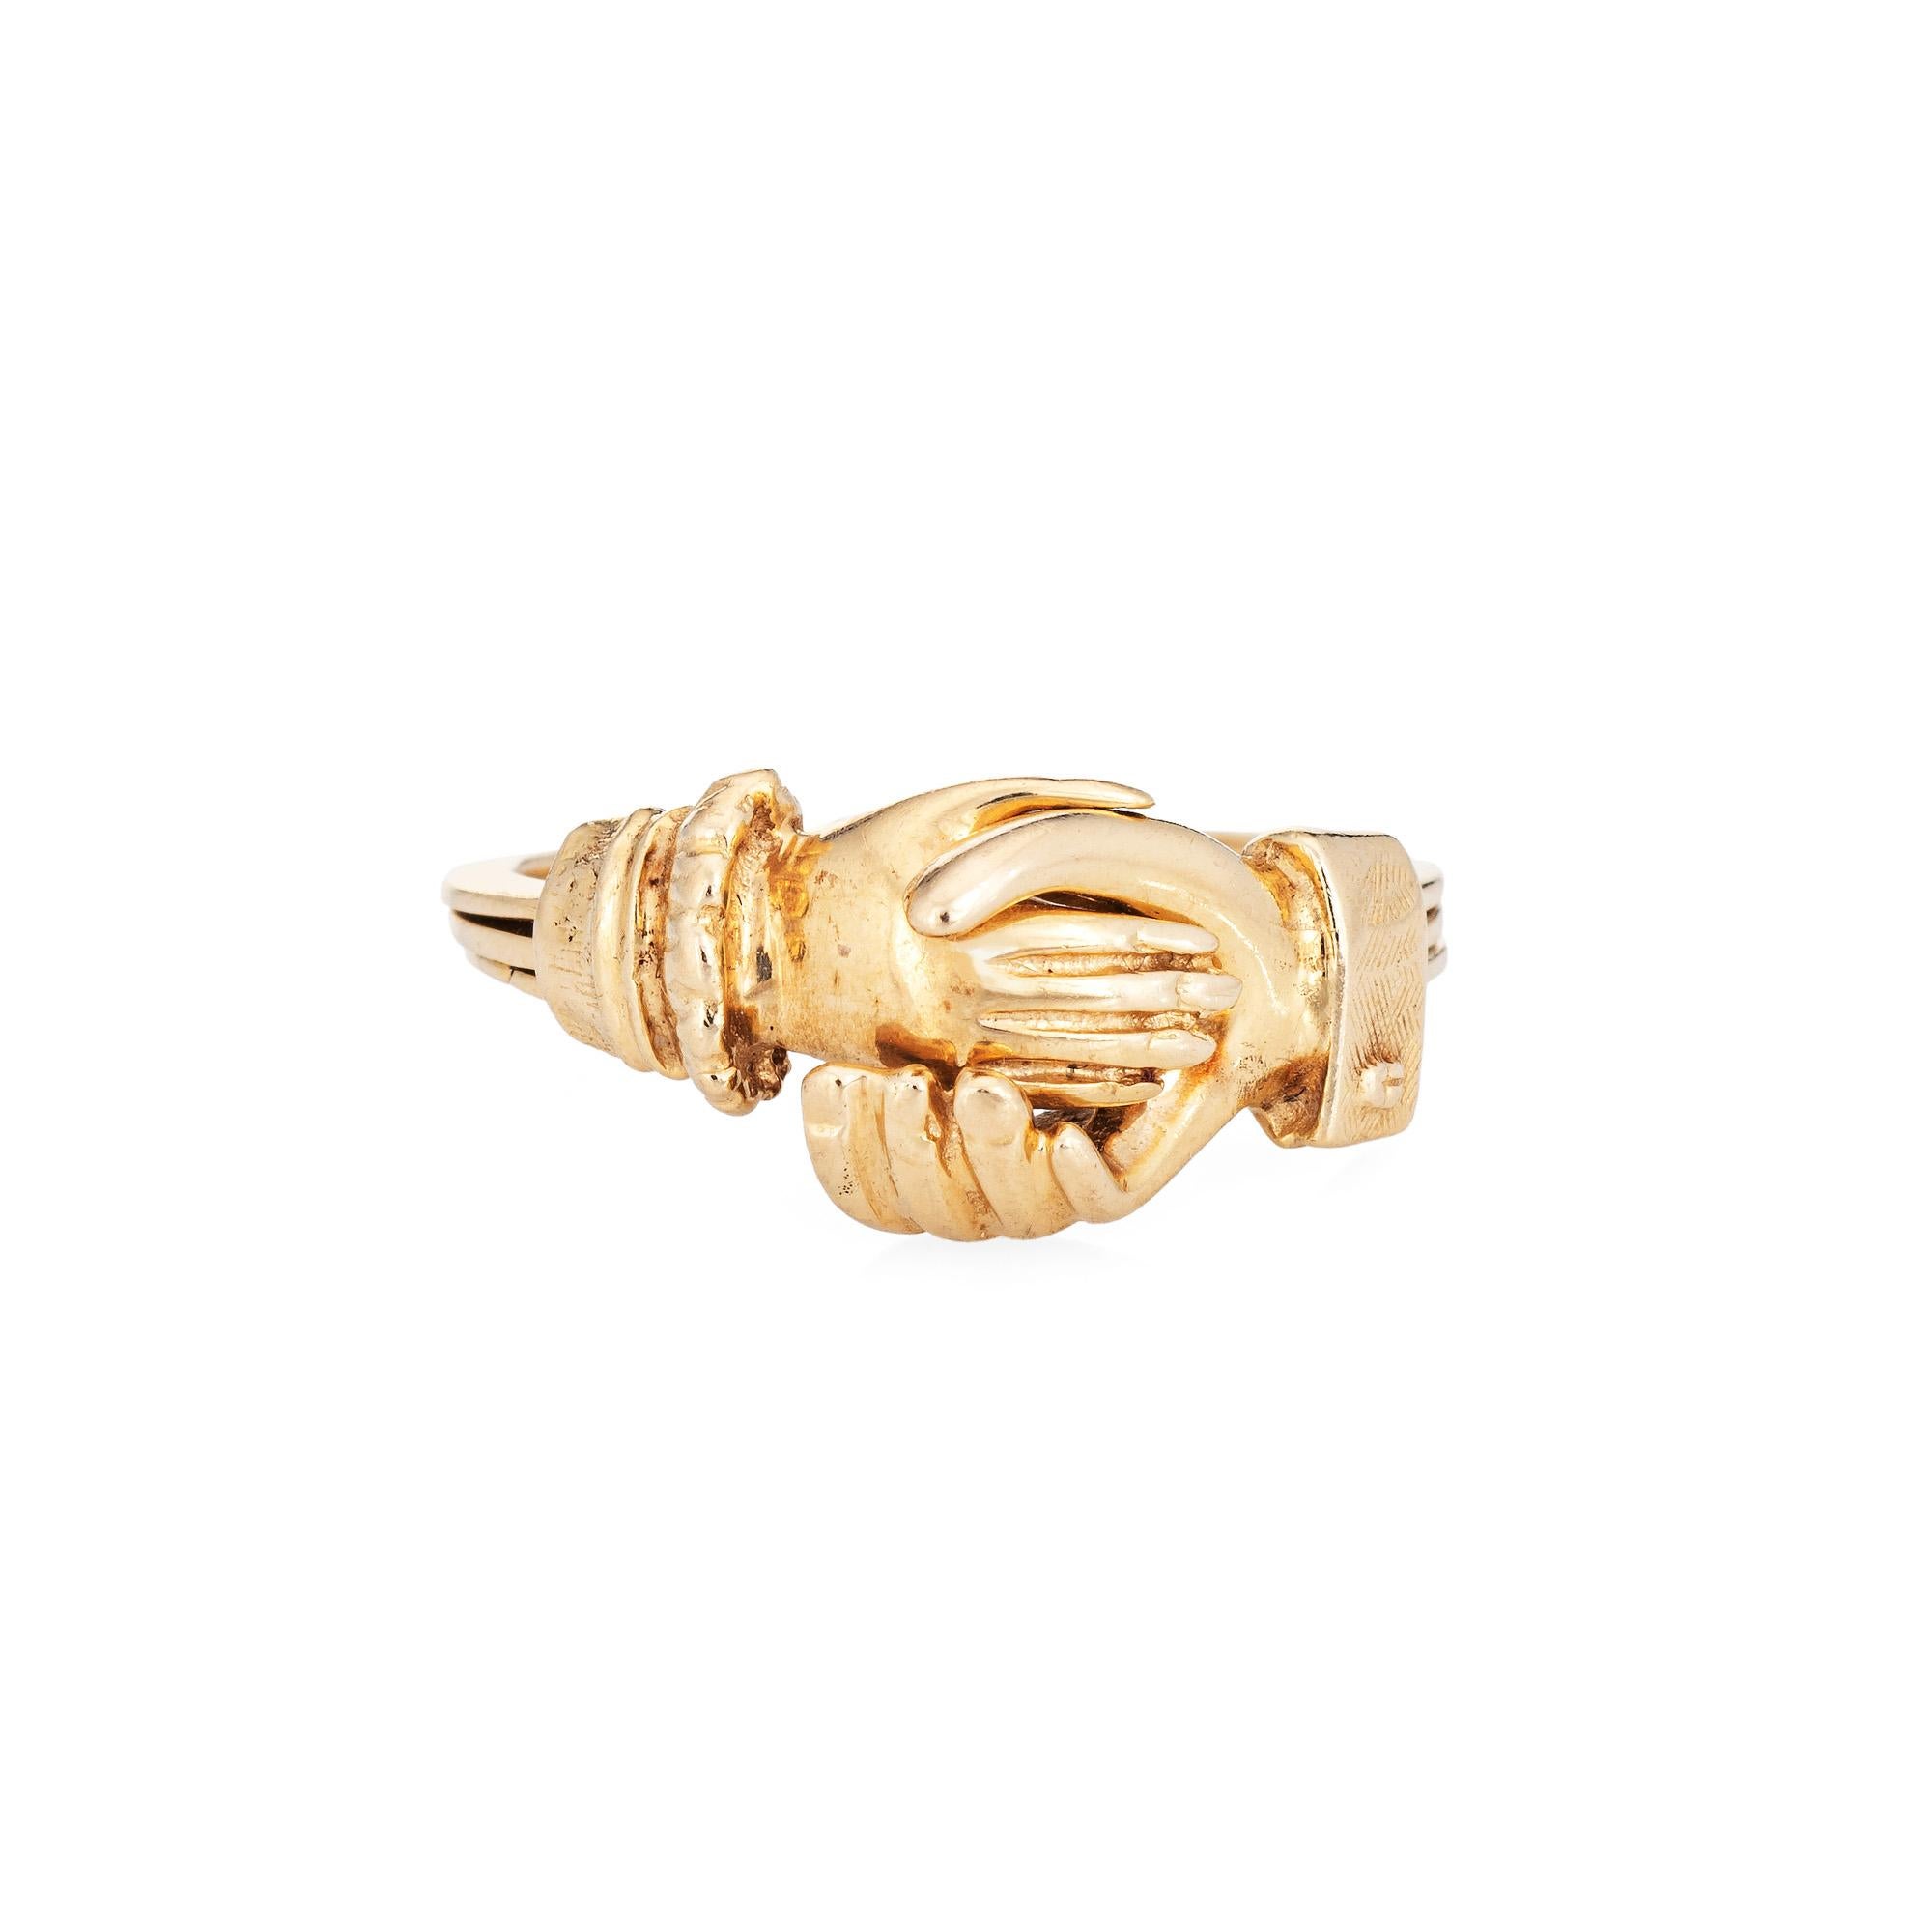 Stylish vintage Gimmal ring crafted in 14 karat yellow gold. 

Gimmel rings have been popular for centuries, with the holding hands symbolizing eternal love and loyalty. The interlocking bands represent an unbreakable union. The hands 'open' to